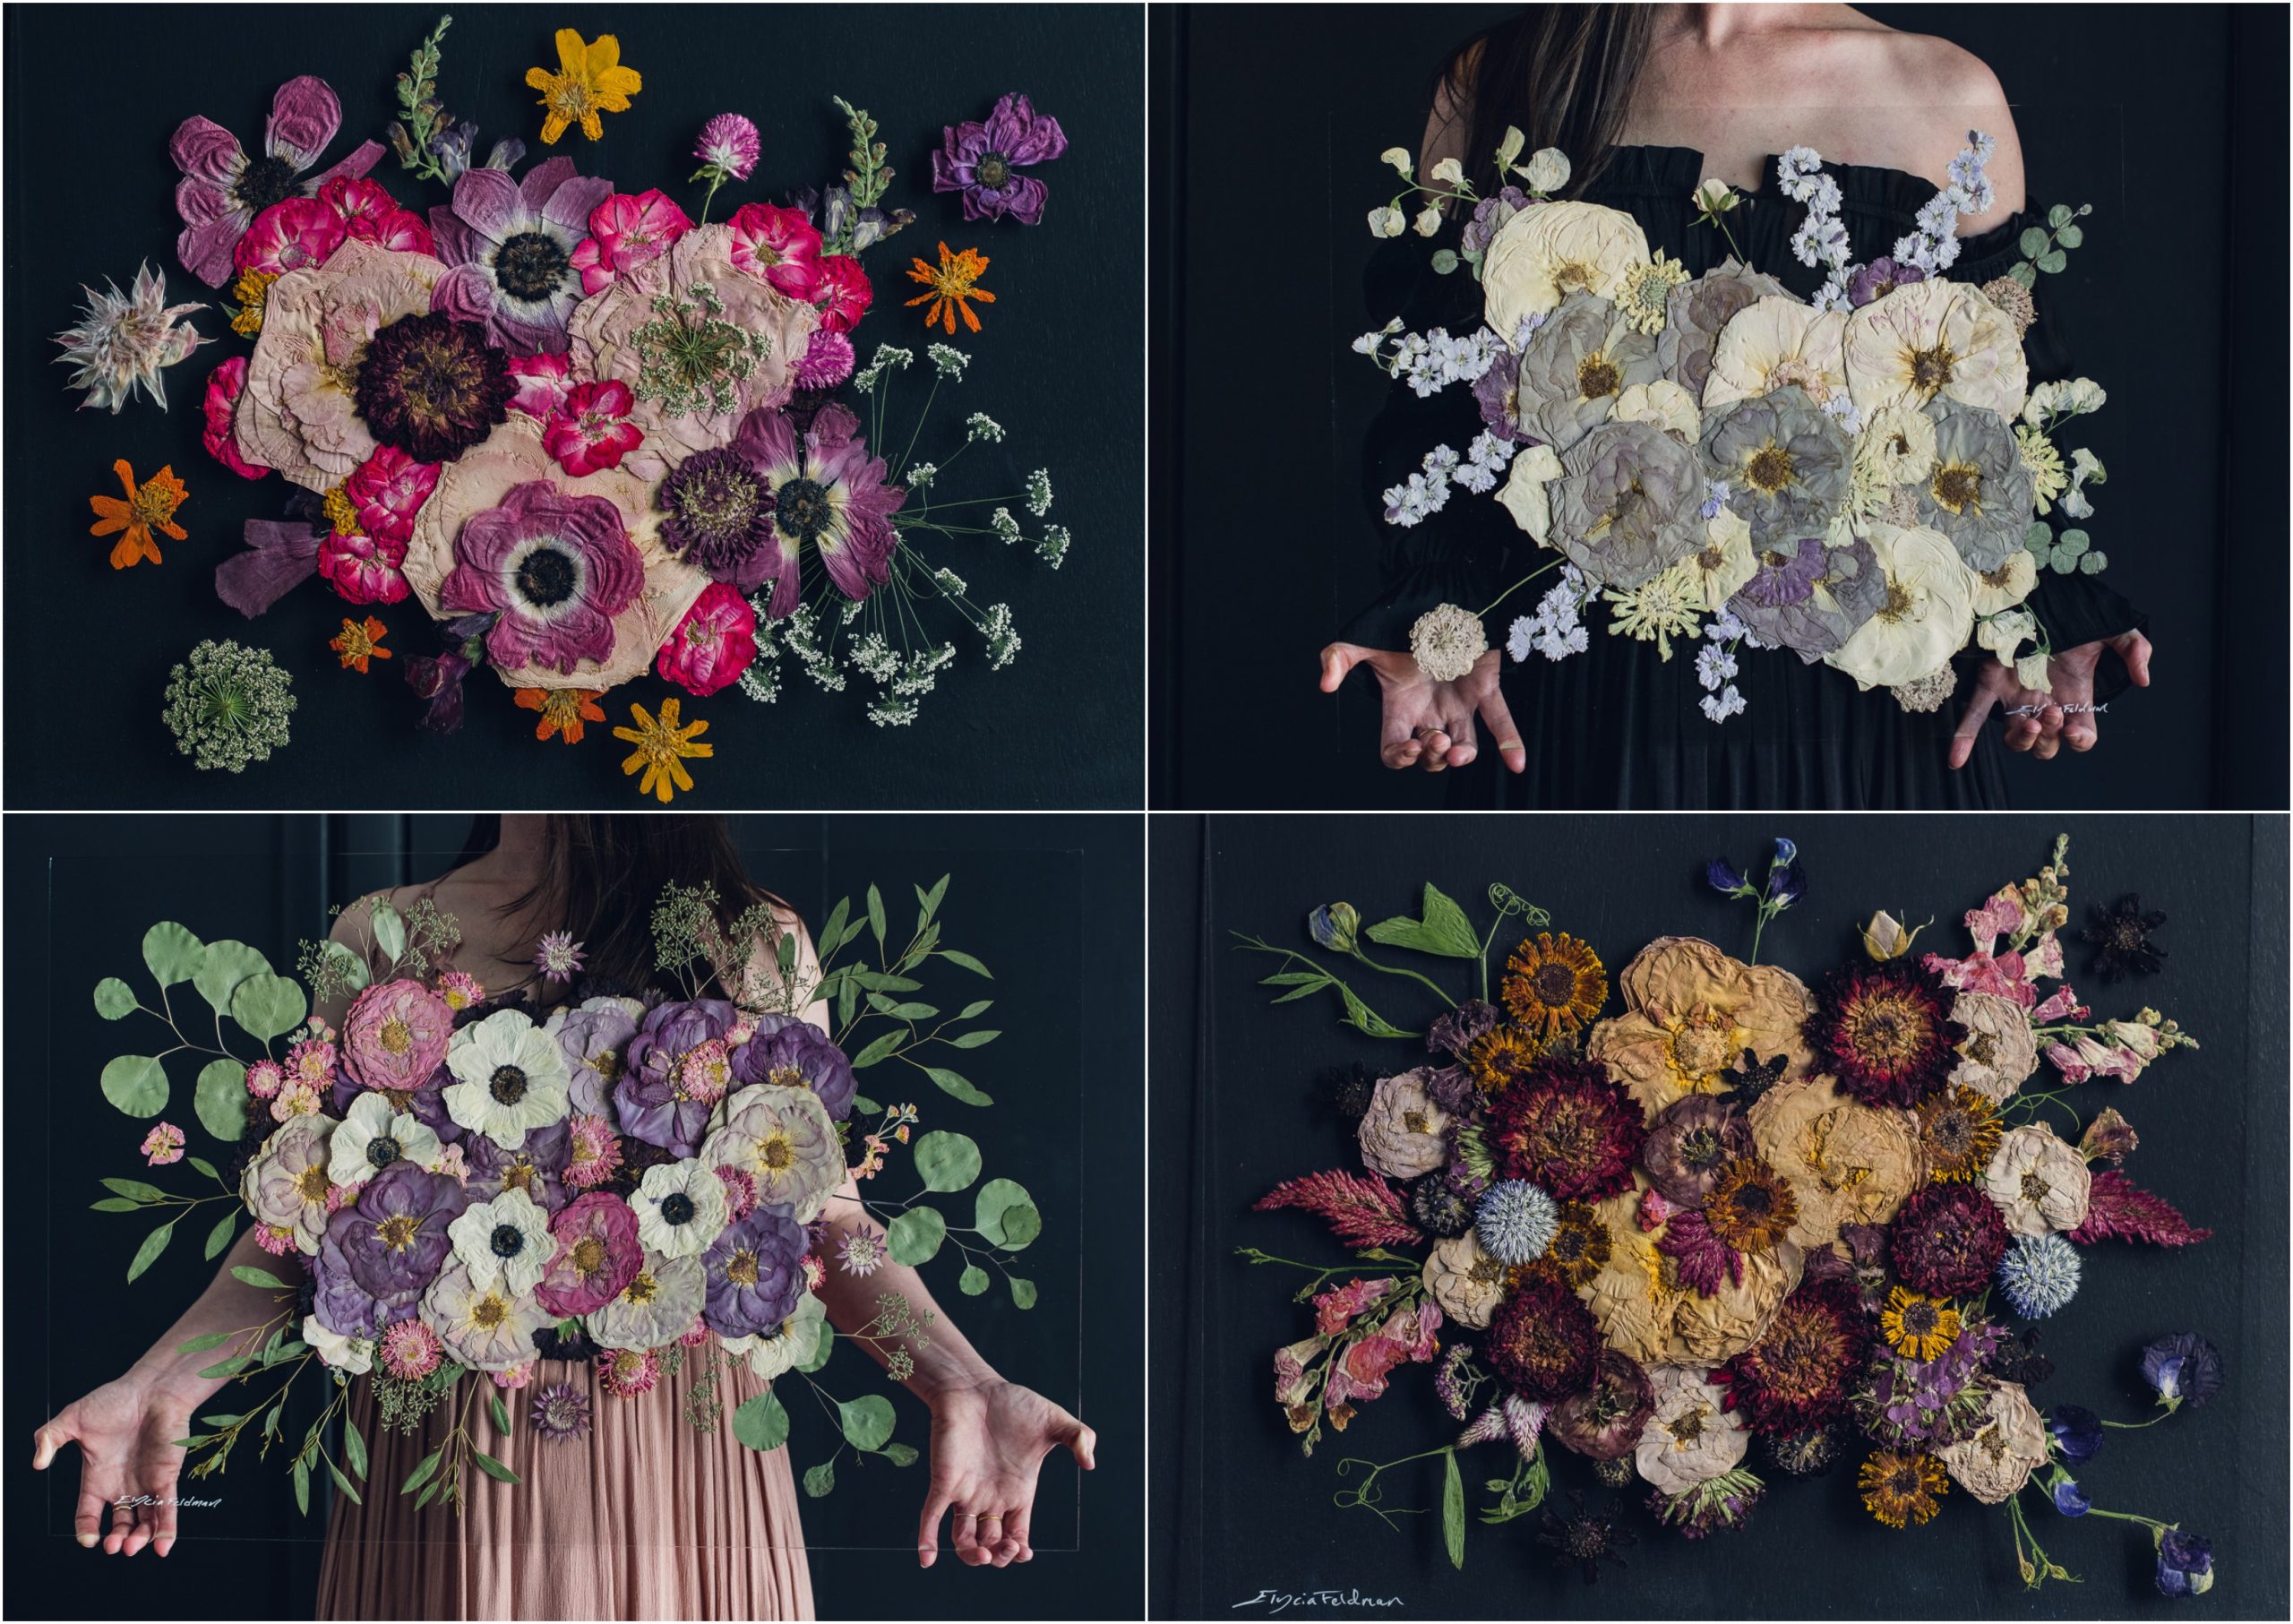 pressed flowers arranged in a bouquet design to preserve wedding flowers